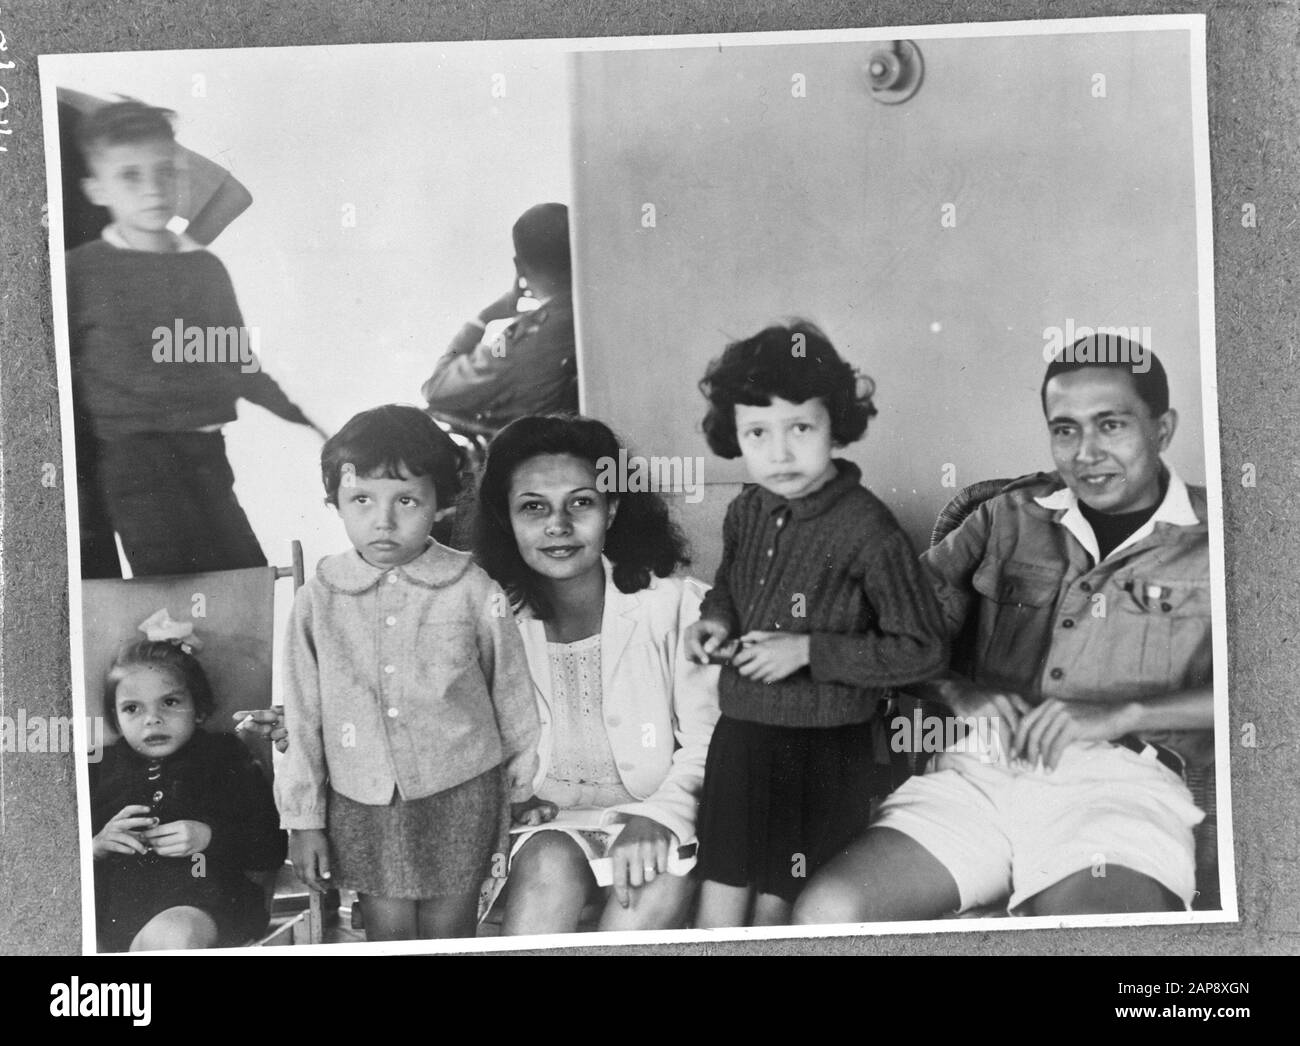 Dutch internees arrive in Melbourne with the Orange Fontein Description: The Orange Fontein with Dutch internees on board from Japanese prison camps in Batavia (Dutch East Indies) arrives in Melbourne on 27 October 1945. Mr. and Mrs. Goodsir with their children Carry (6 years) and Tianny (4 years) after landing at Victoria Docks. Mrs. Goodsir was a political prisoner of the Kempetai for one month. She was tortured by the Japanese (including pulling off nails and working with burning cigarettes). The family will recover three months Date: 27 October 1945 Location: Australia, Melbourne Keywords: Stock Photo